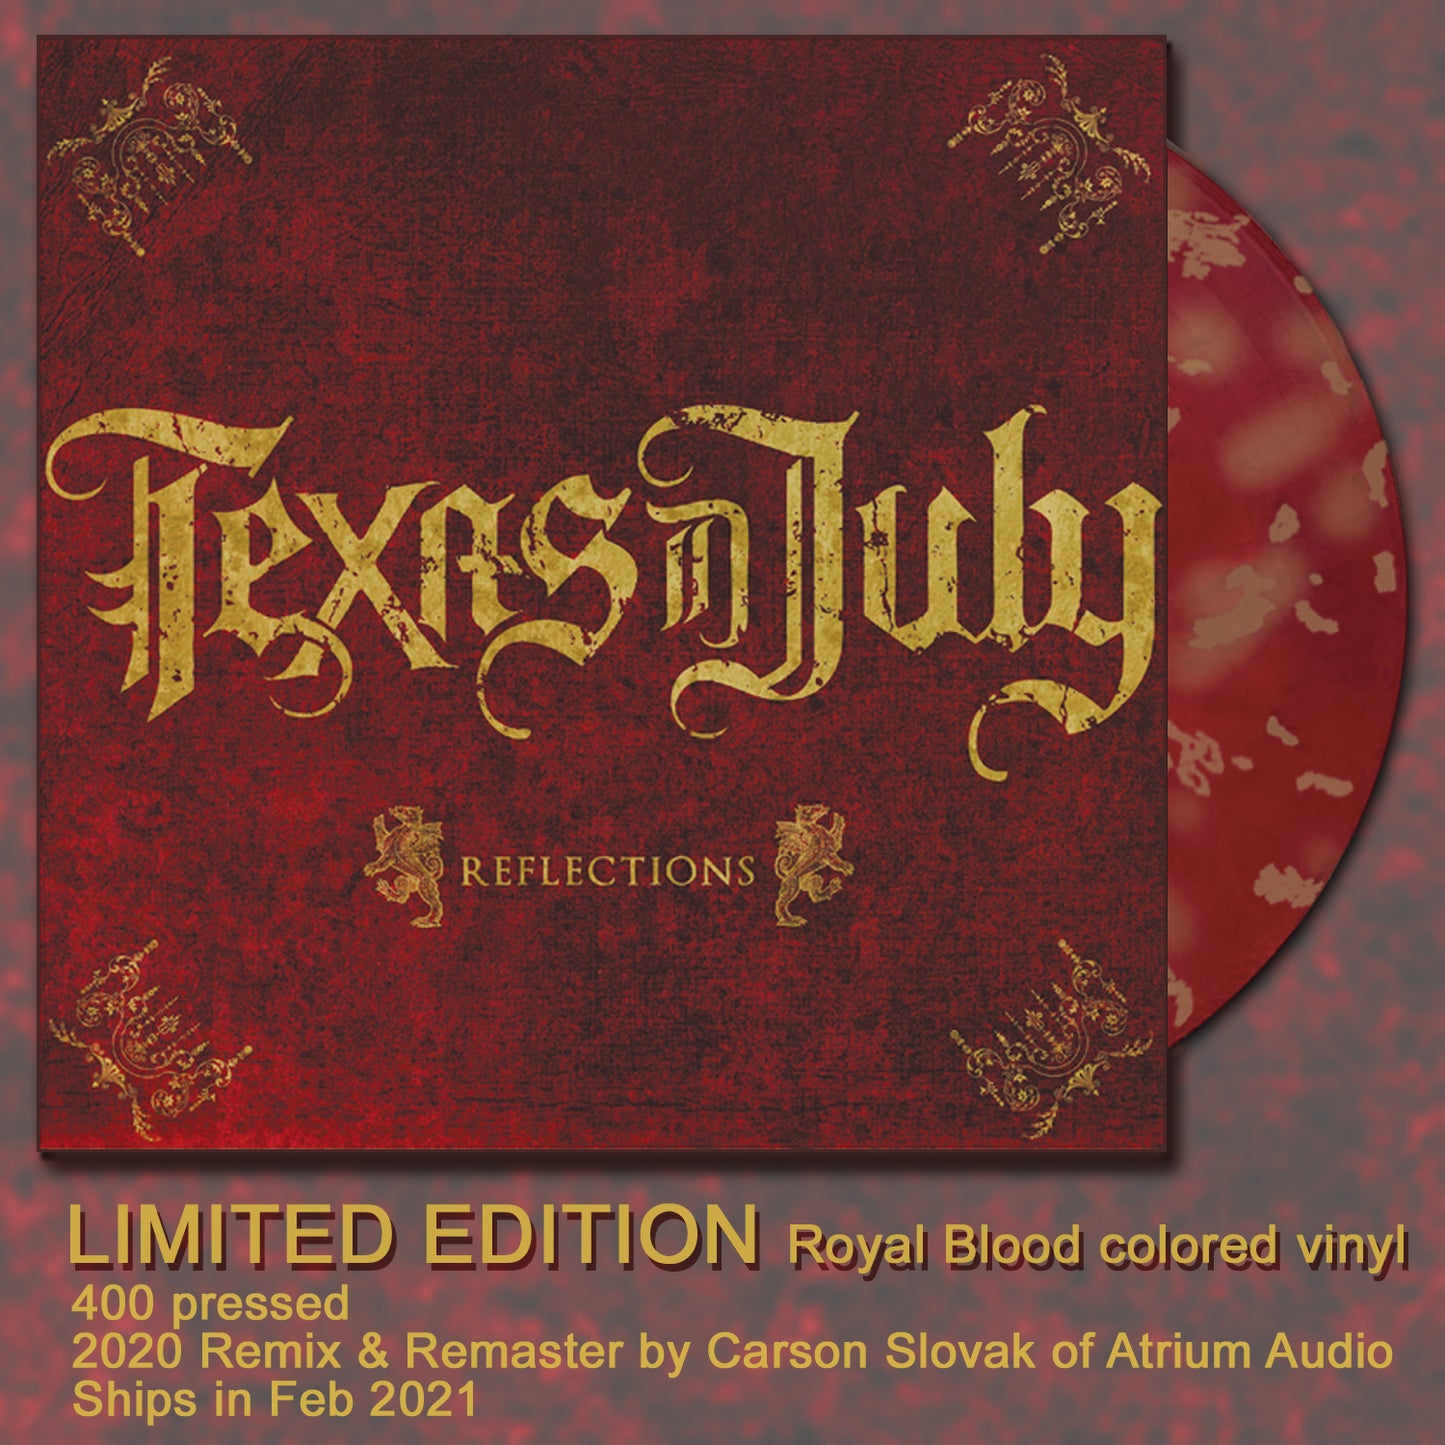 Texas In July 'Reflections' LP